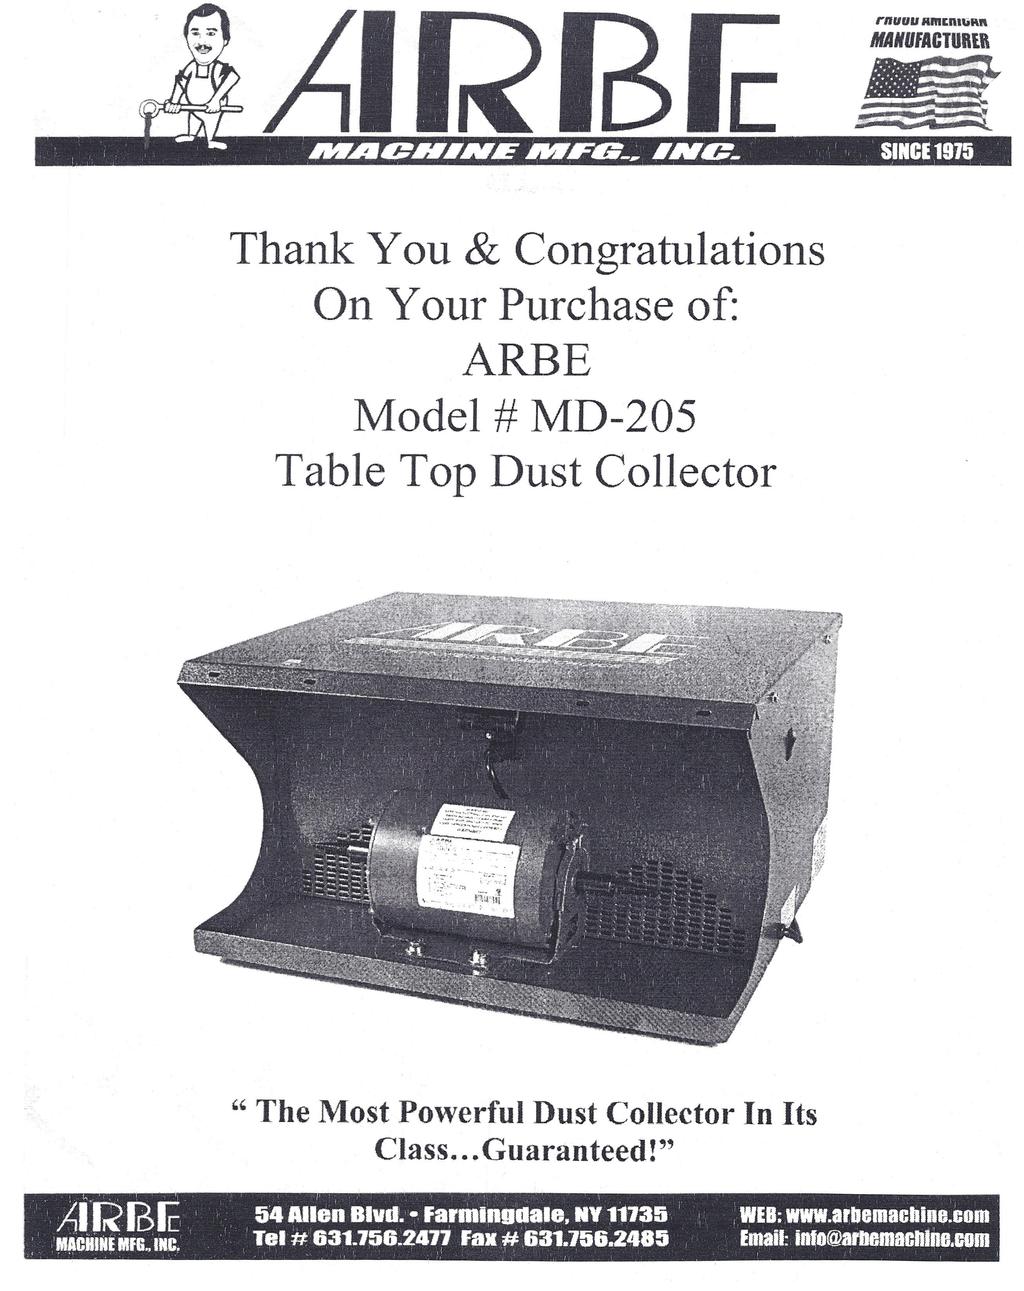 Thank You & Congratulations On Your Purchase of: ARBE Model # MD-205 Table Top Dust Collector " The Most Powerful Dust Collector n ts Class... Guaranteed!